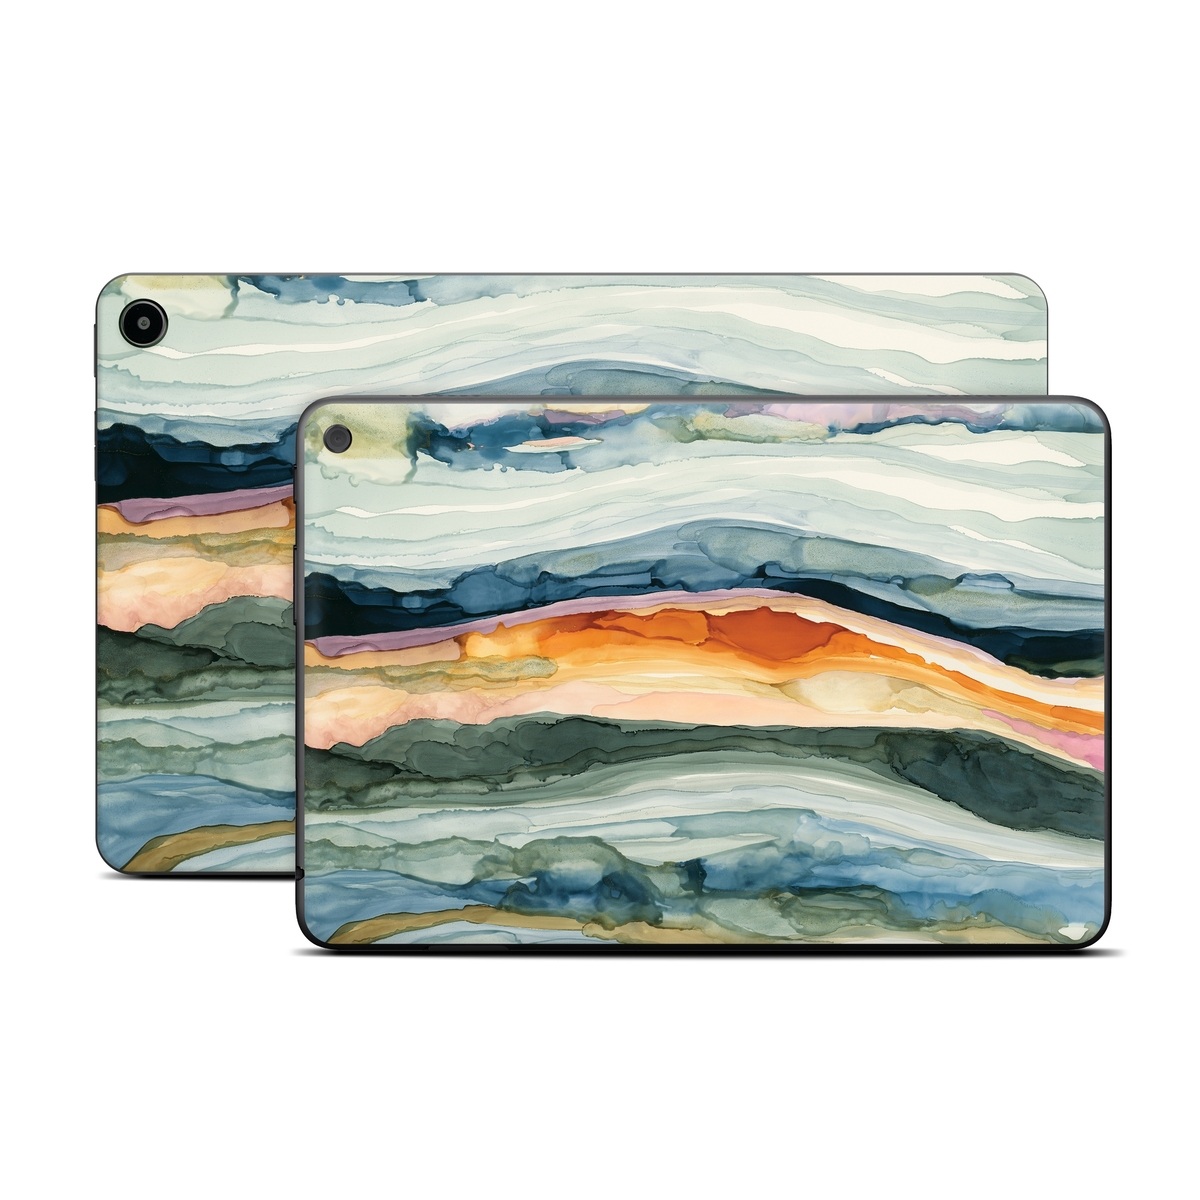 Amazon Fire Tablet Series Skin Skin design of Watercolor paint, Painting, Sky, Wave, Geology, Landscape, Pattern, Acrylic paint, Cloud, Paint, with blue, purple, orange, yellow, red, green, brown colors